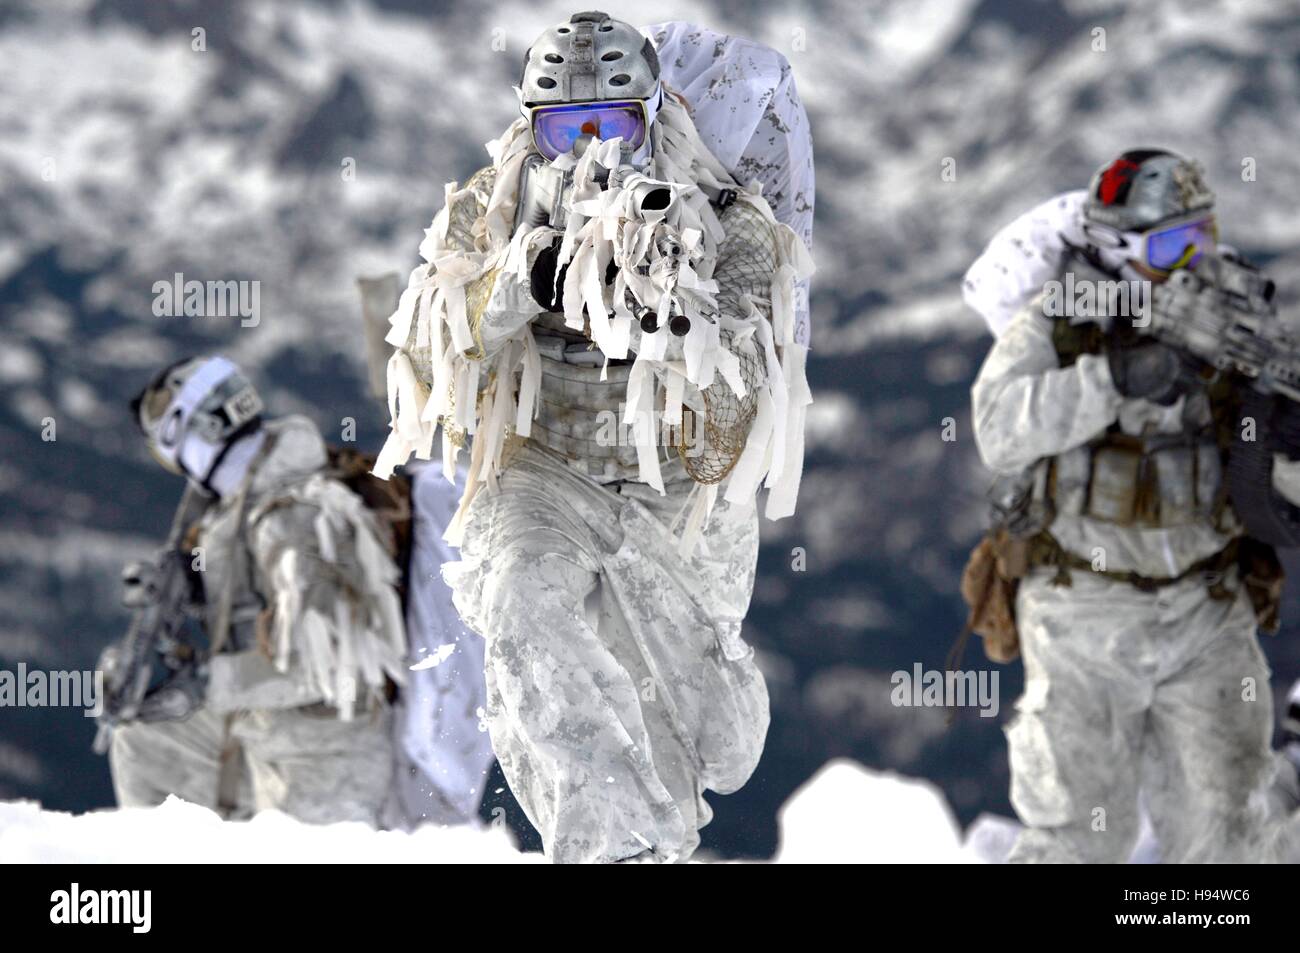 U.S. Navy SEAL soldiers demonstrate winter warfare techniques in snow camouflage December 9, 2014 in Mammoth Lakes, California. Stock Photo